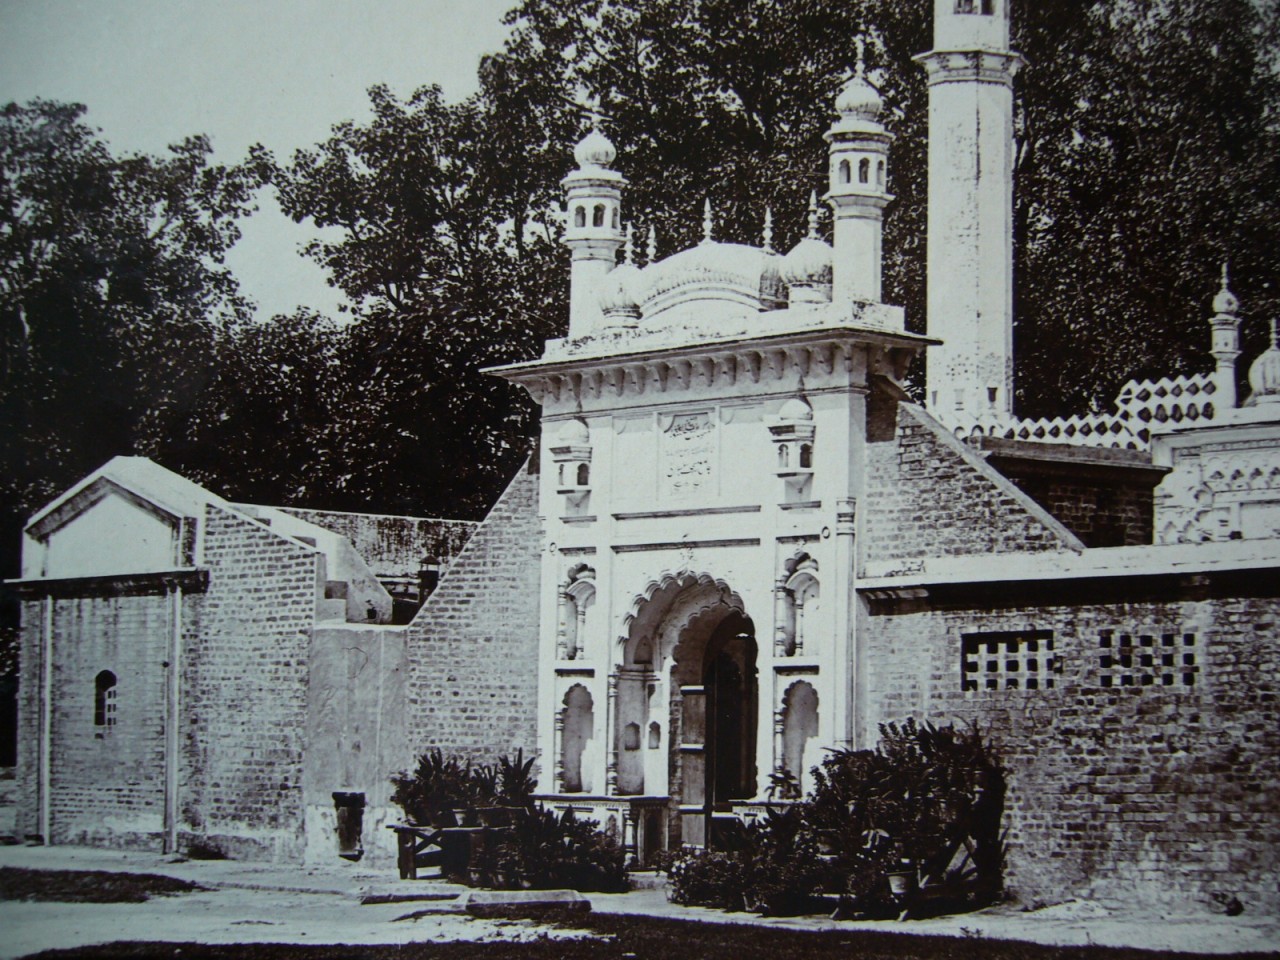 Juma Masjid in Roorkee, Uttarakhand - Late 19th or Early 20th Century - Old Indian Photos